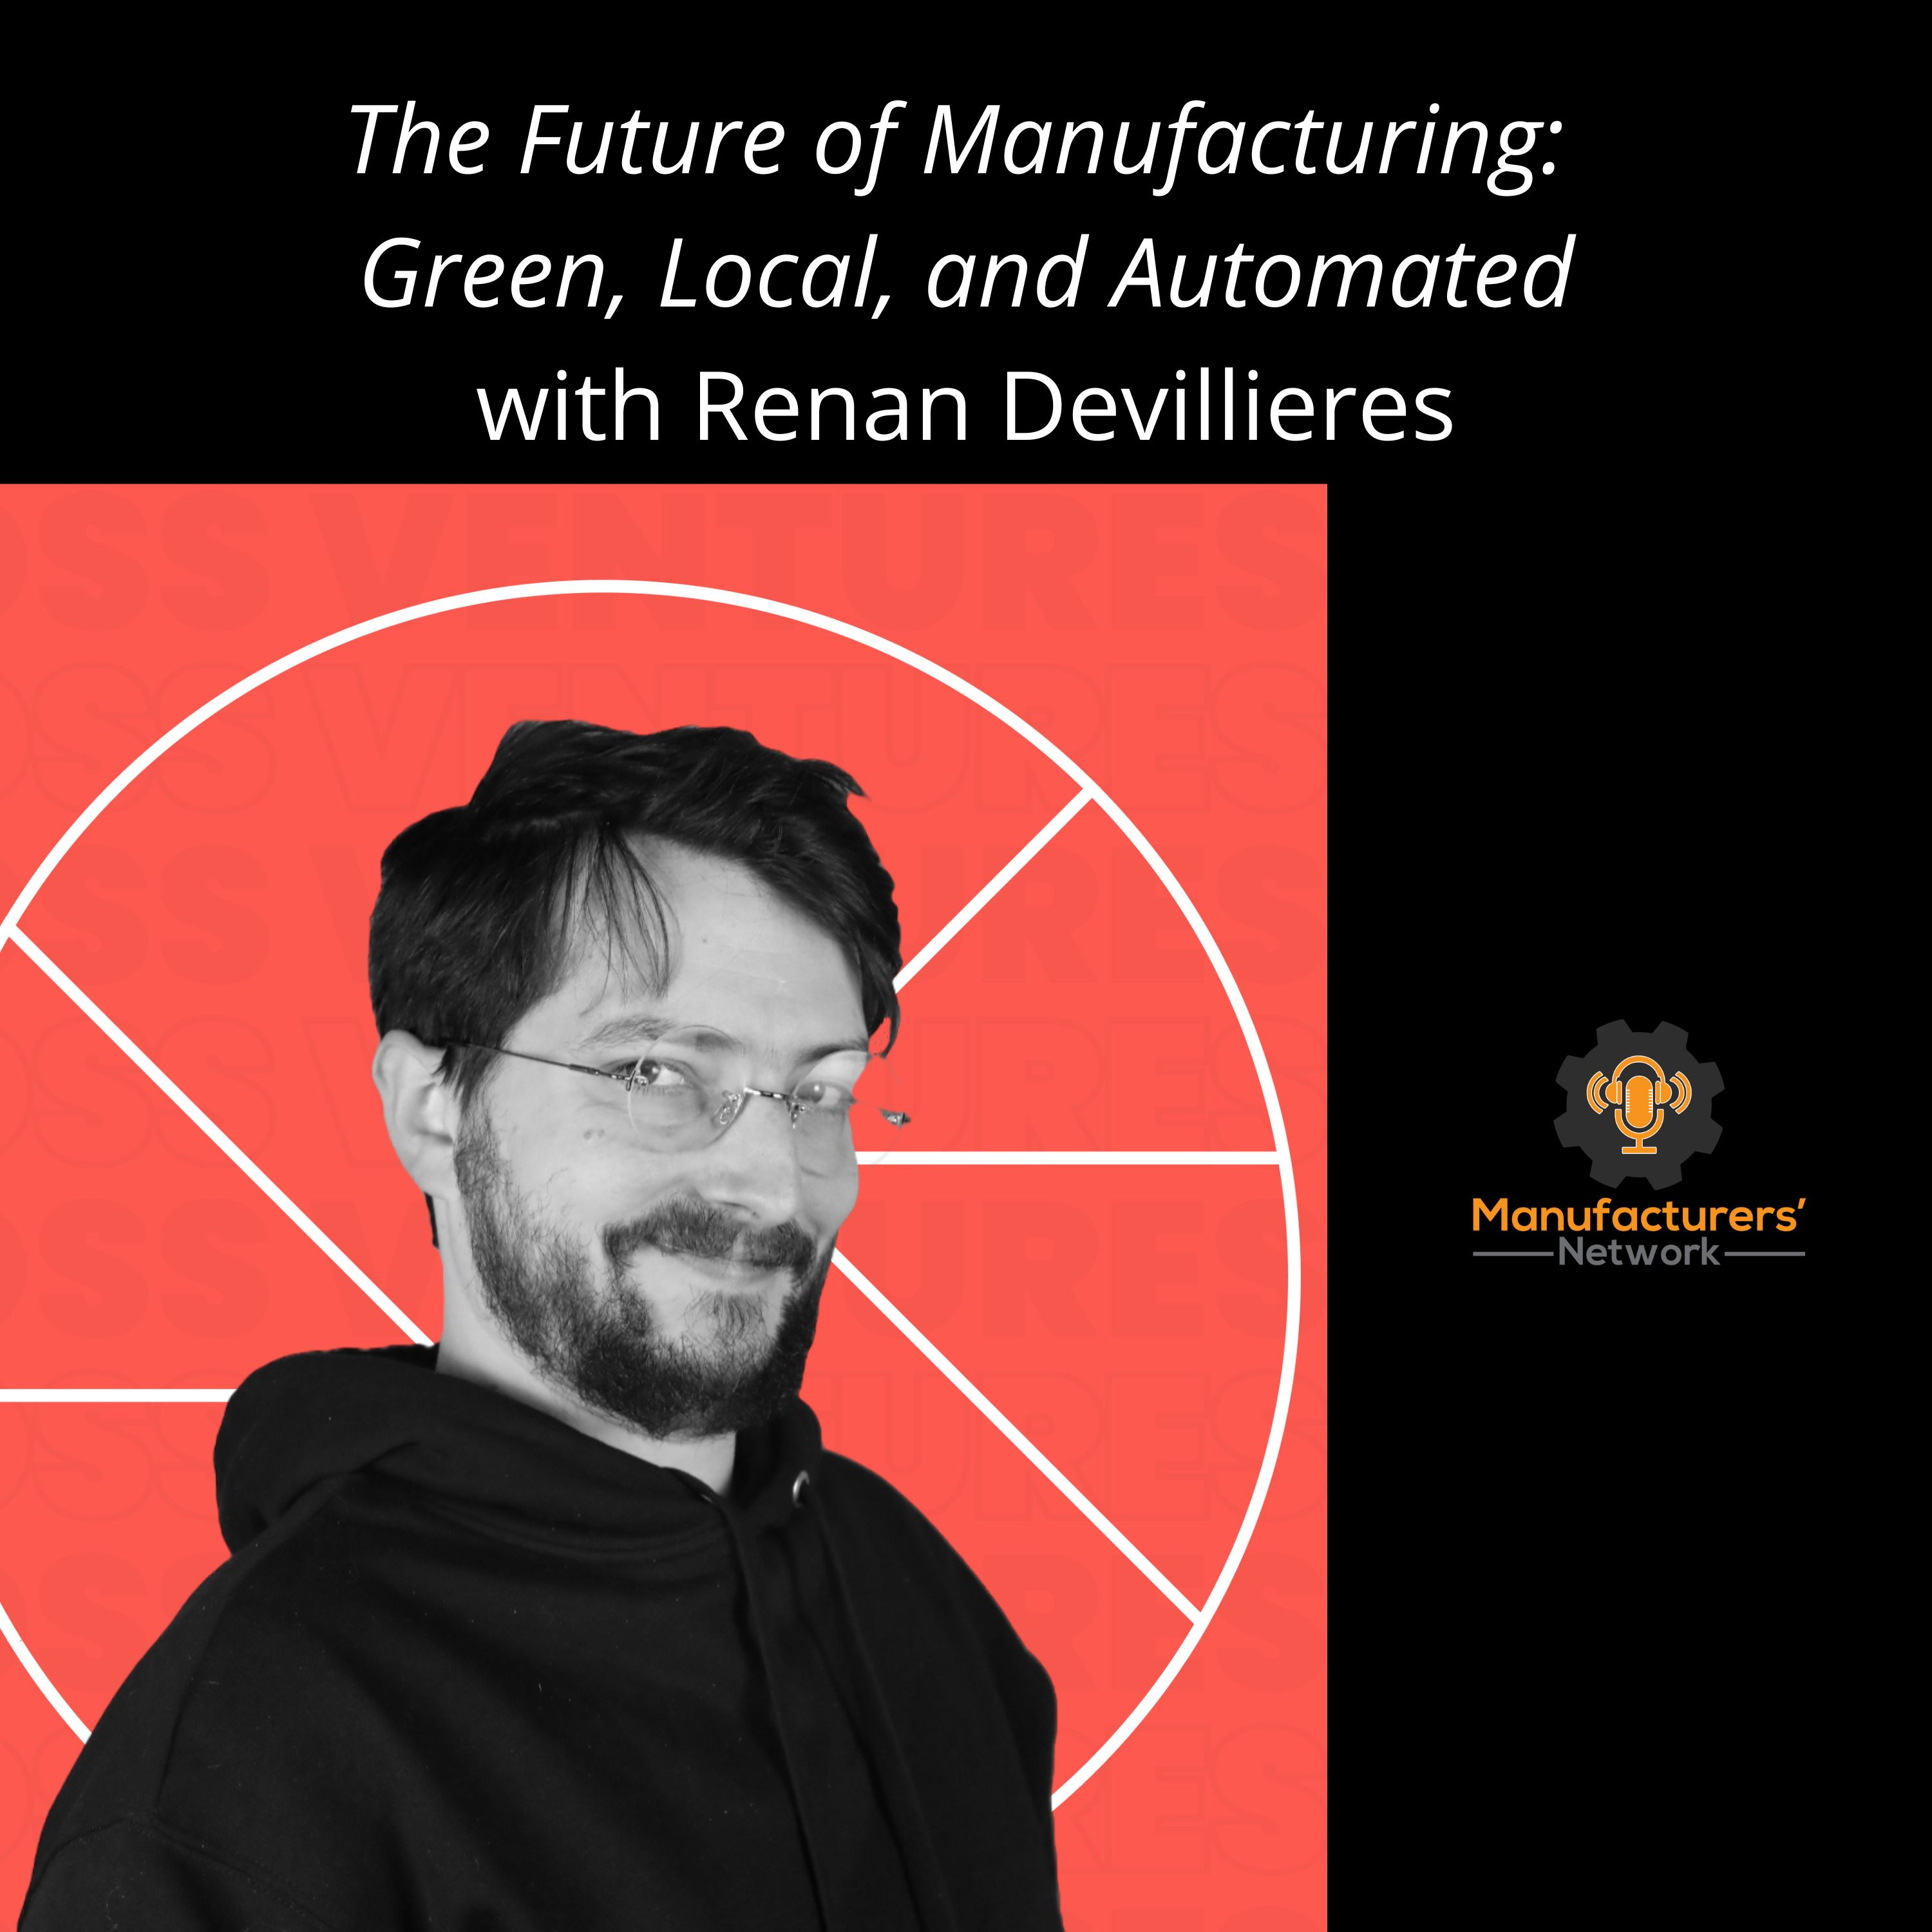 Artwork for podcast The Manufacturers' Network